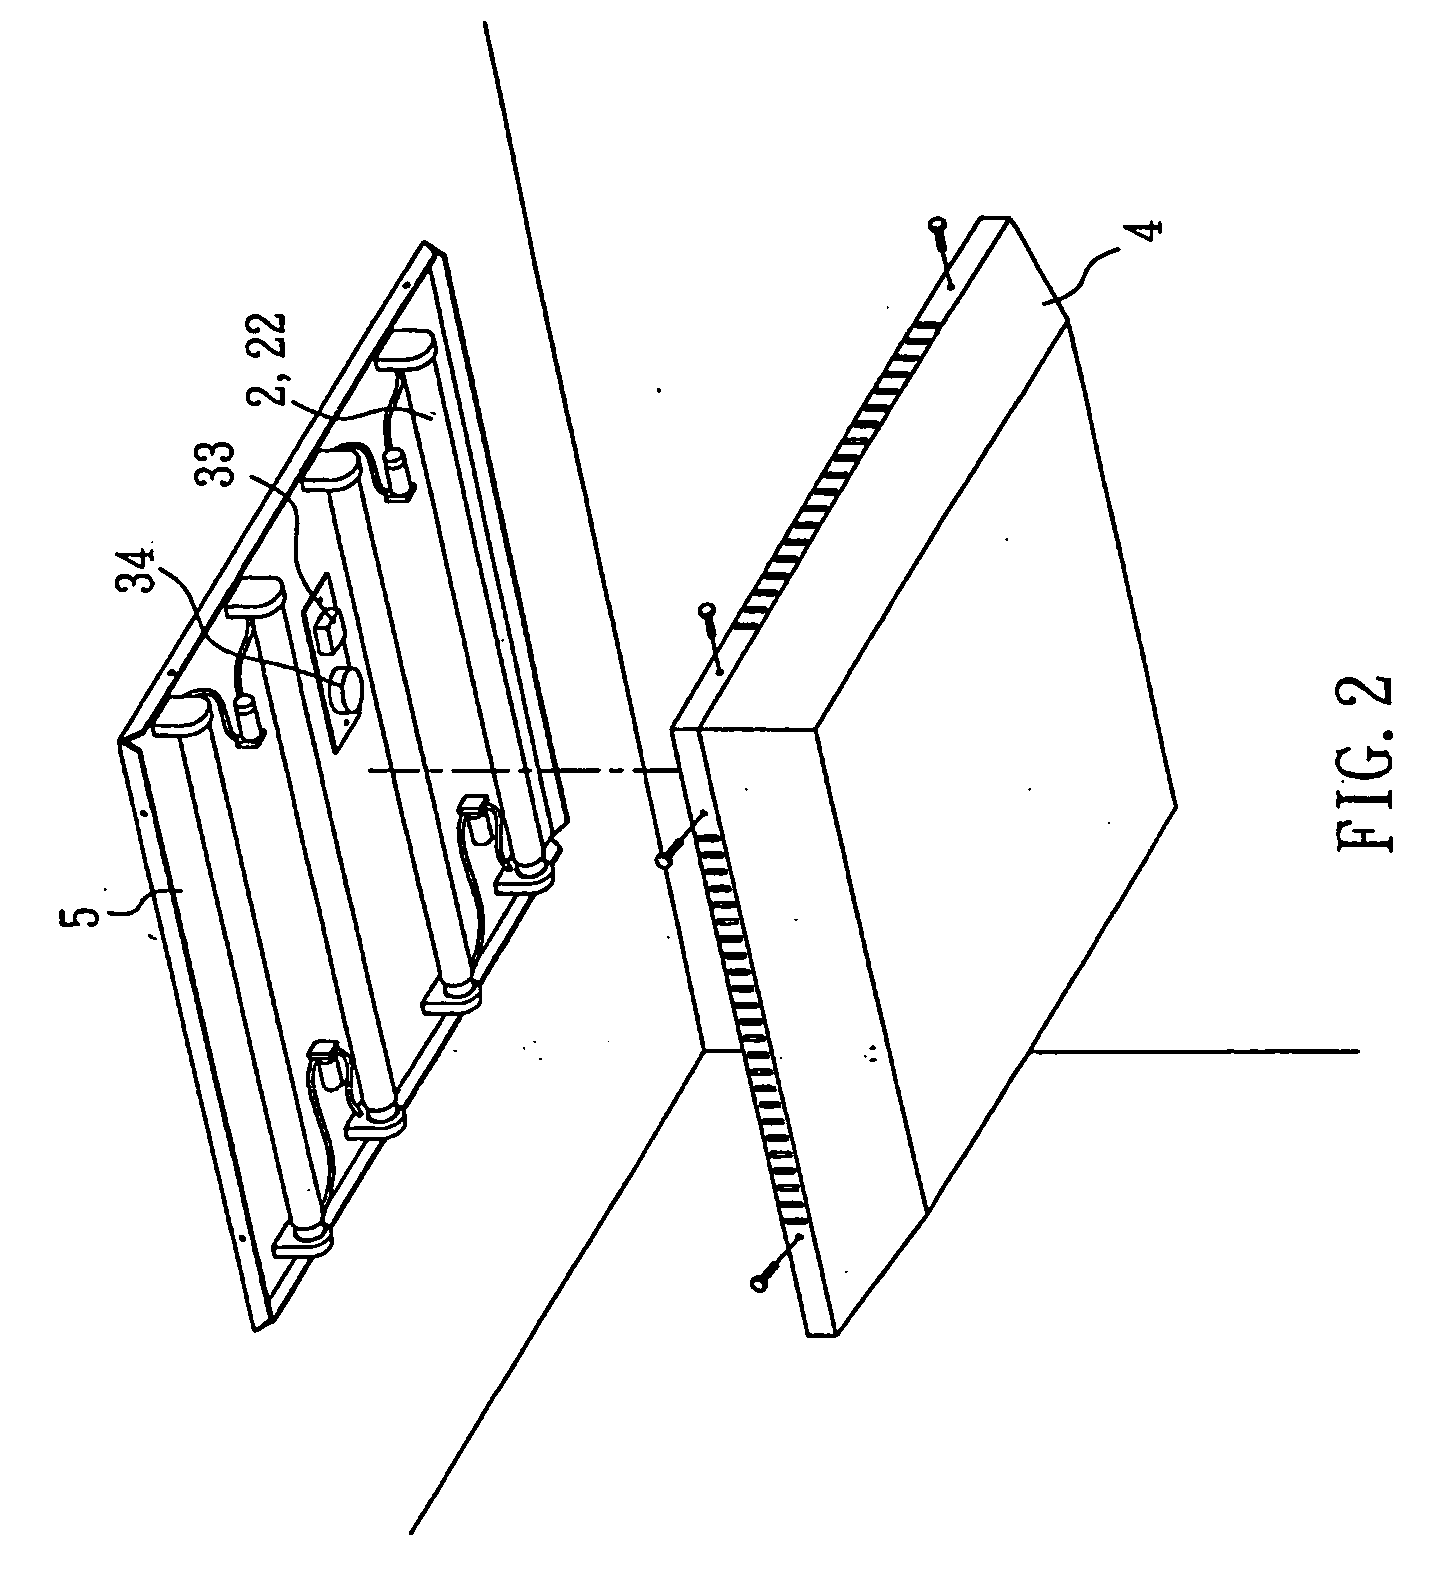 Lamp apparatus with alarm function